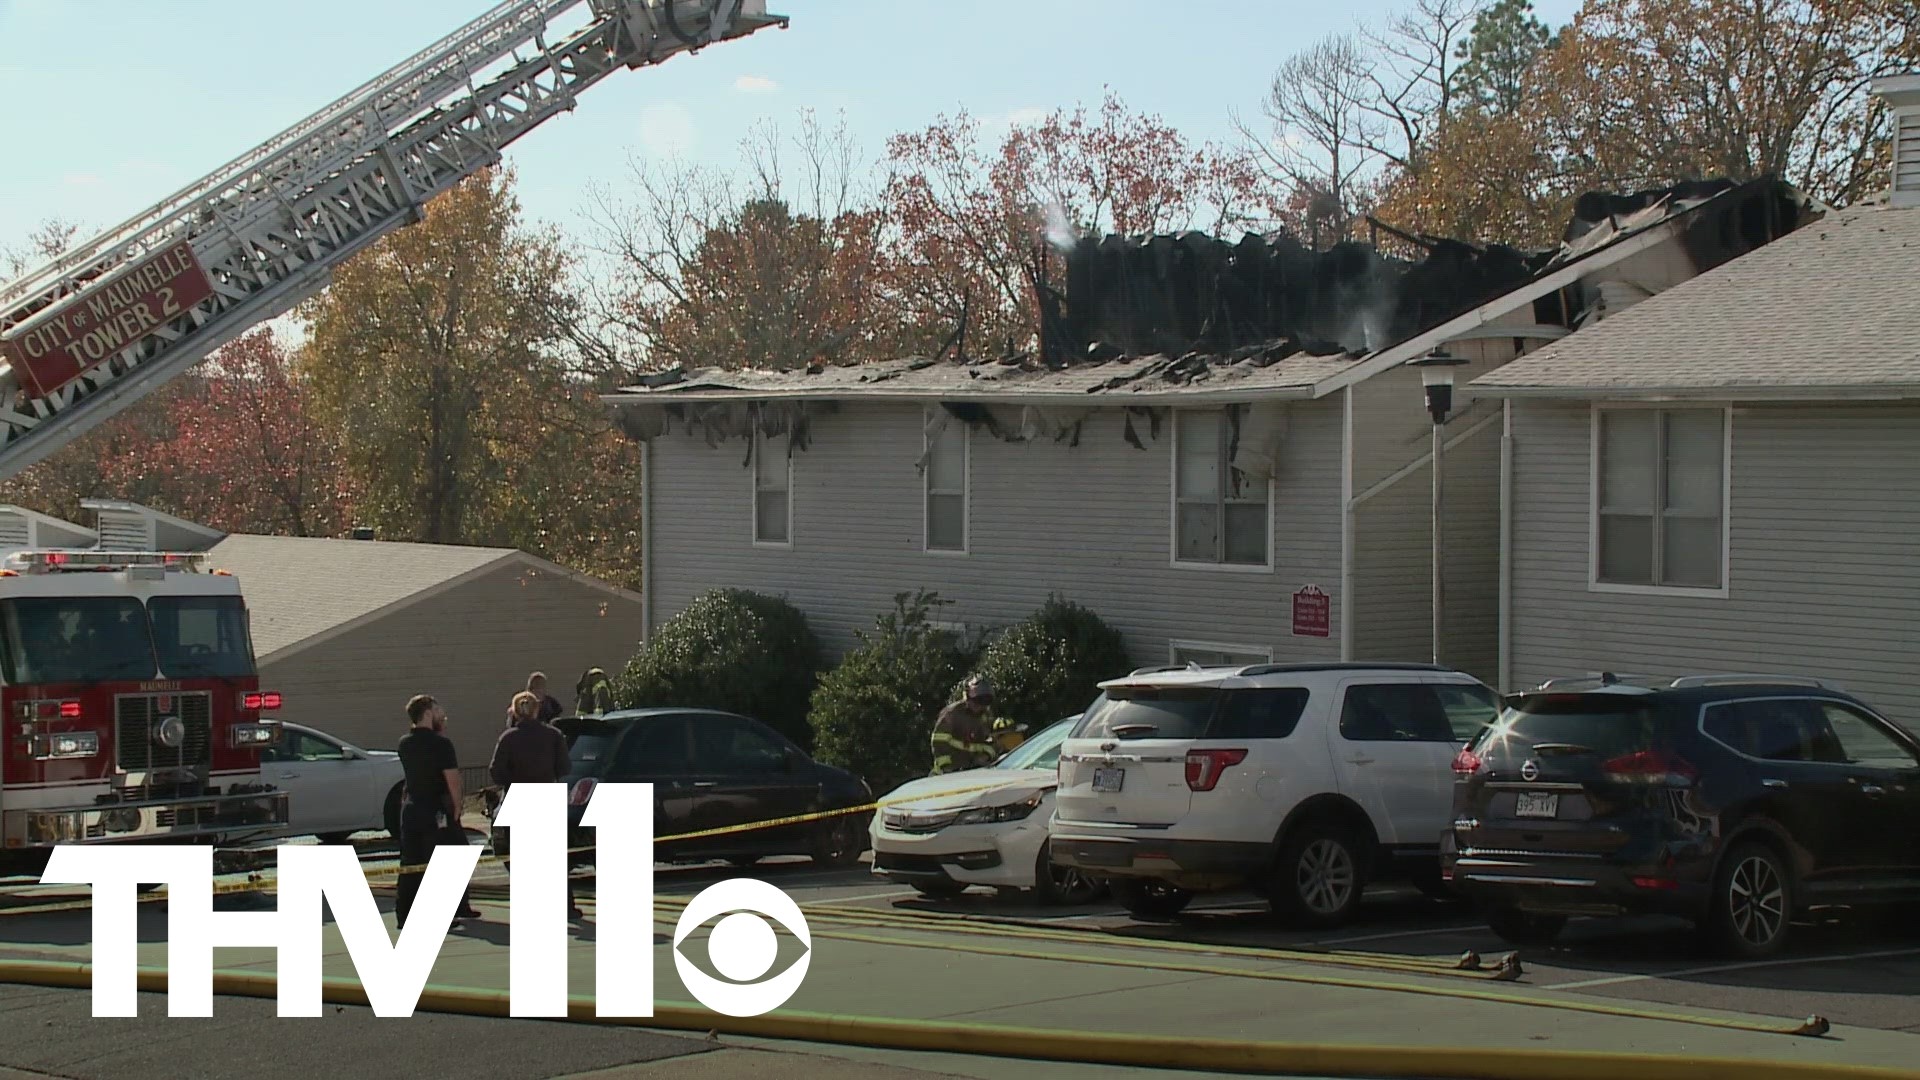 Several tenants have been displaced after a morning fire damaged the Millwood apartments just before the Thanksgiving holiday.